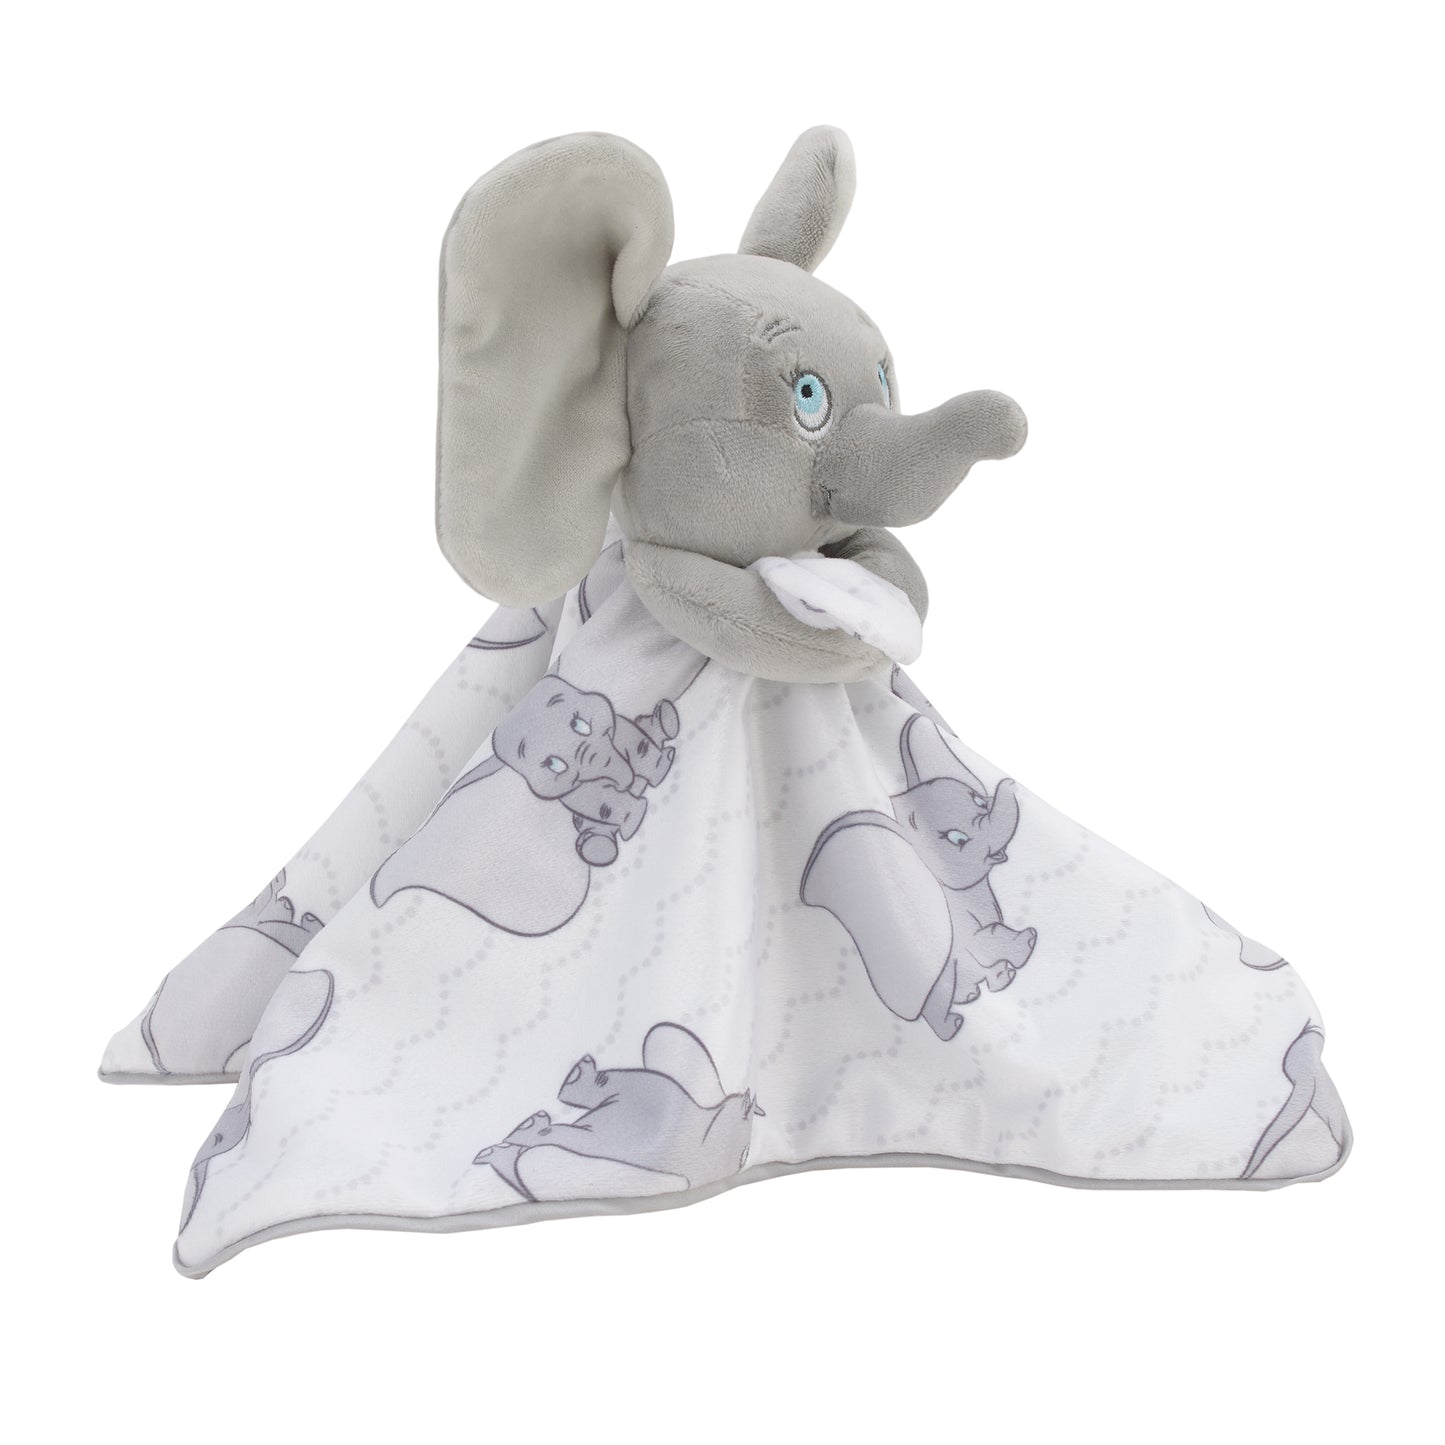 Disney Dumbo White and Grey Lovey Security Blanket